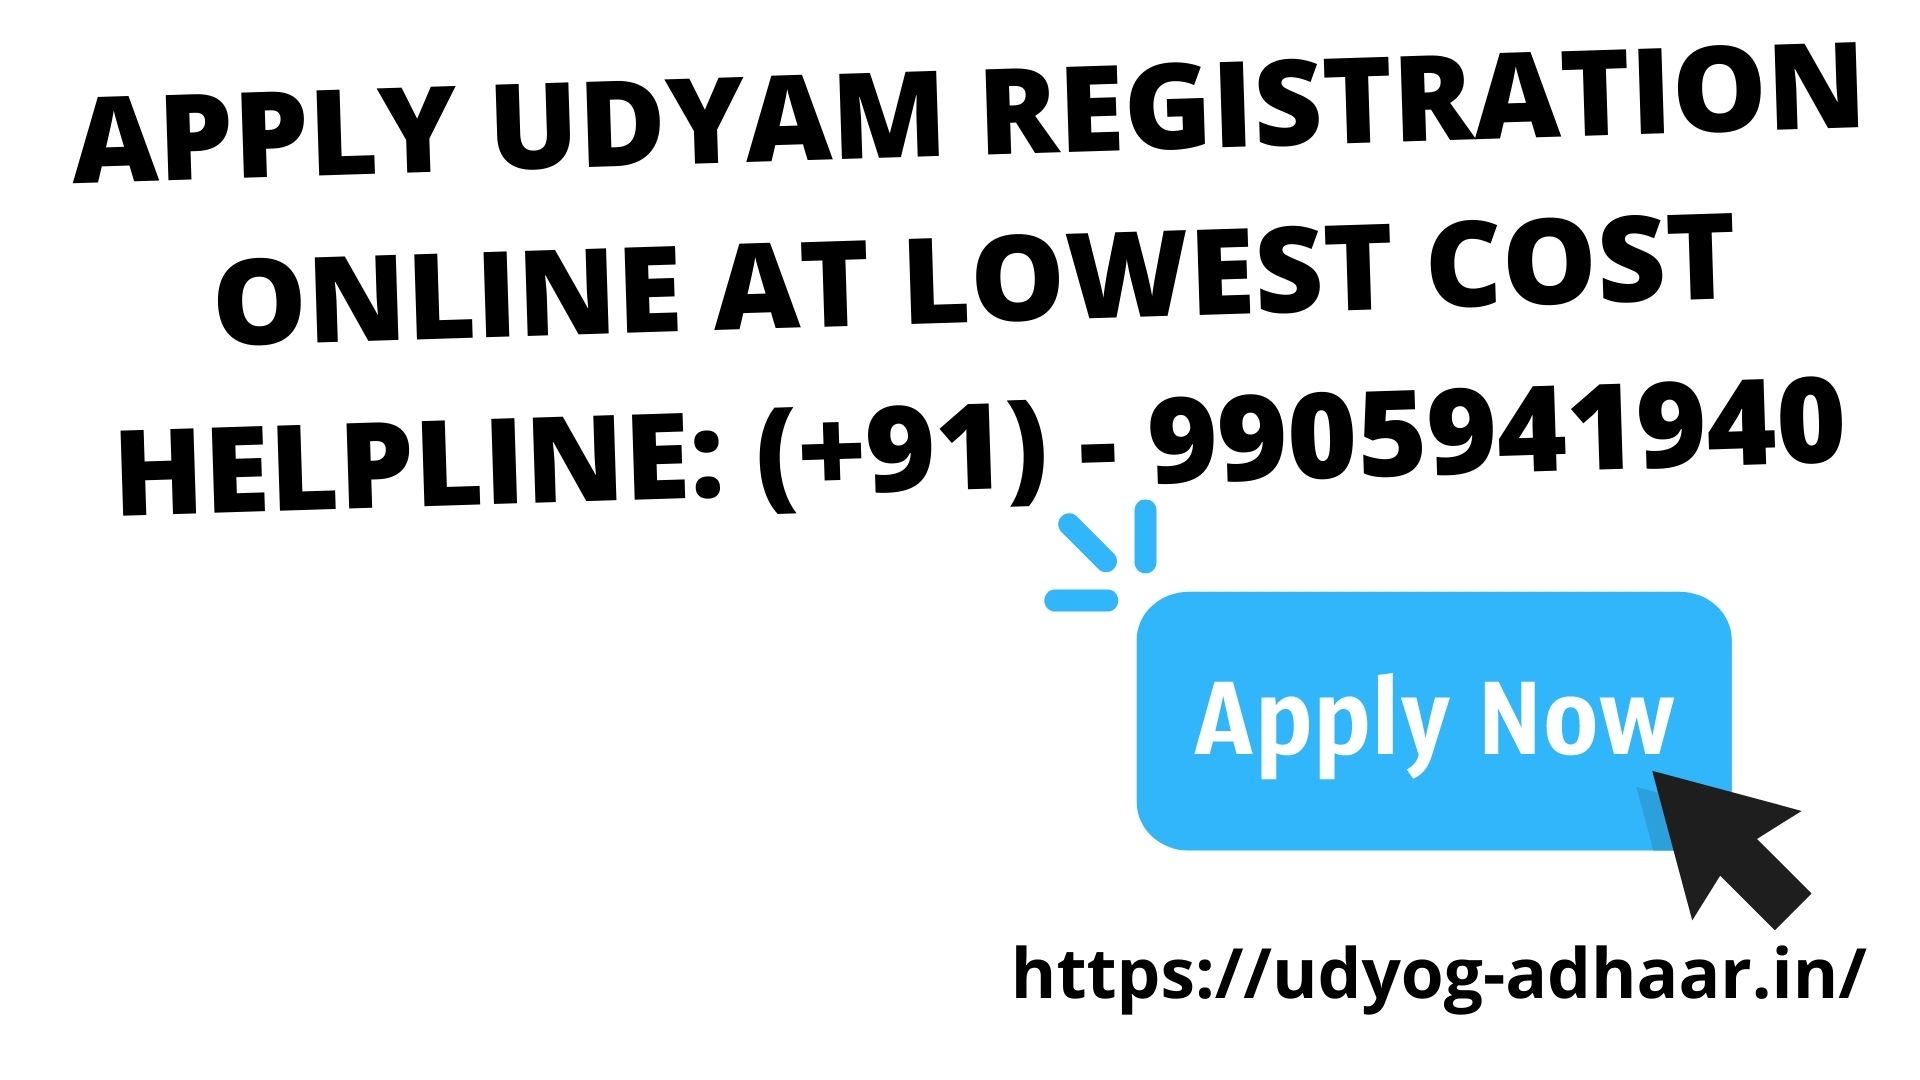 HOW TO APPLY UDYAM REGISTRATION ONLINEServicesEverything ElseAll India